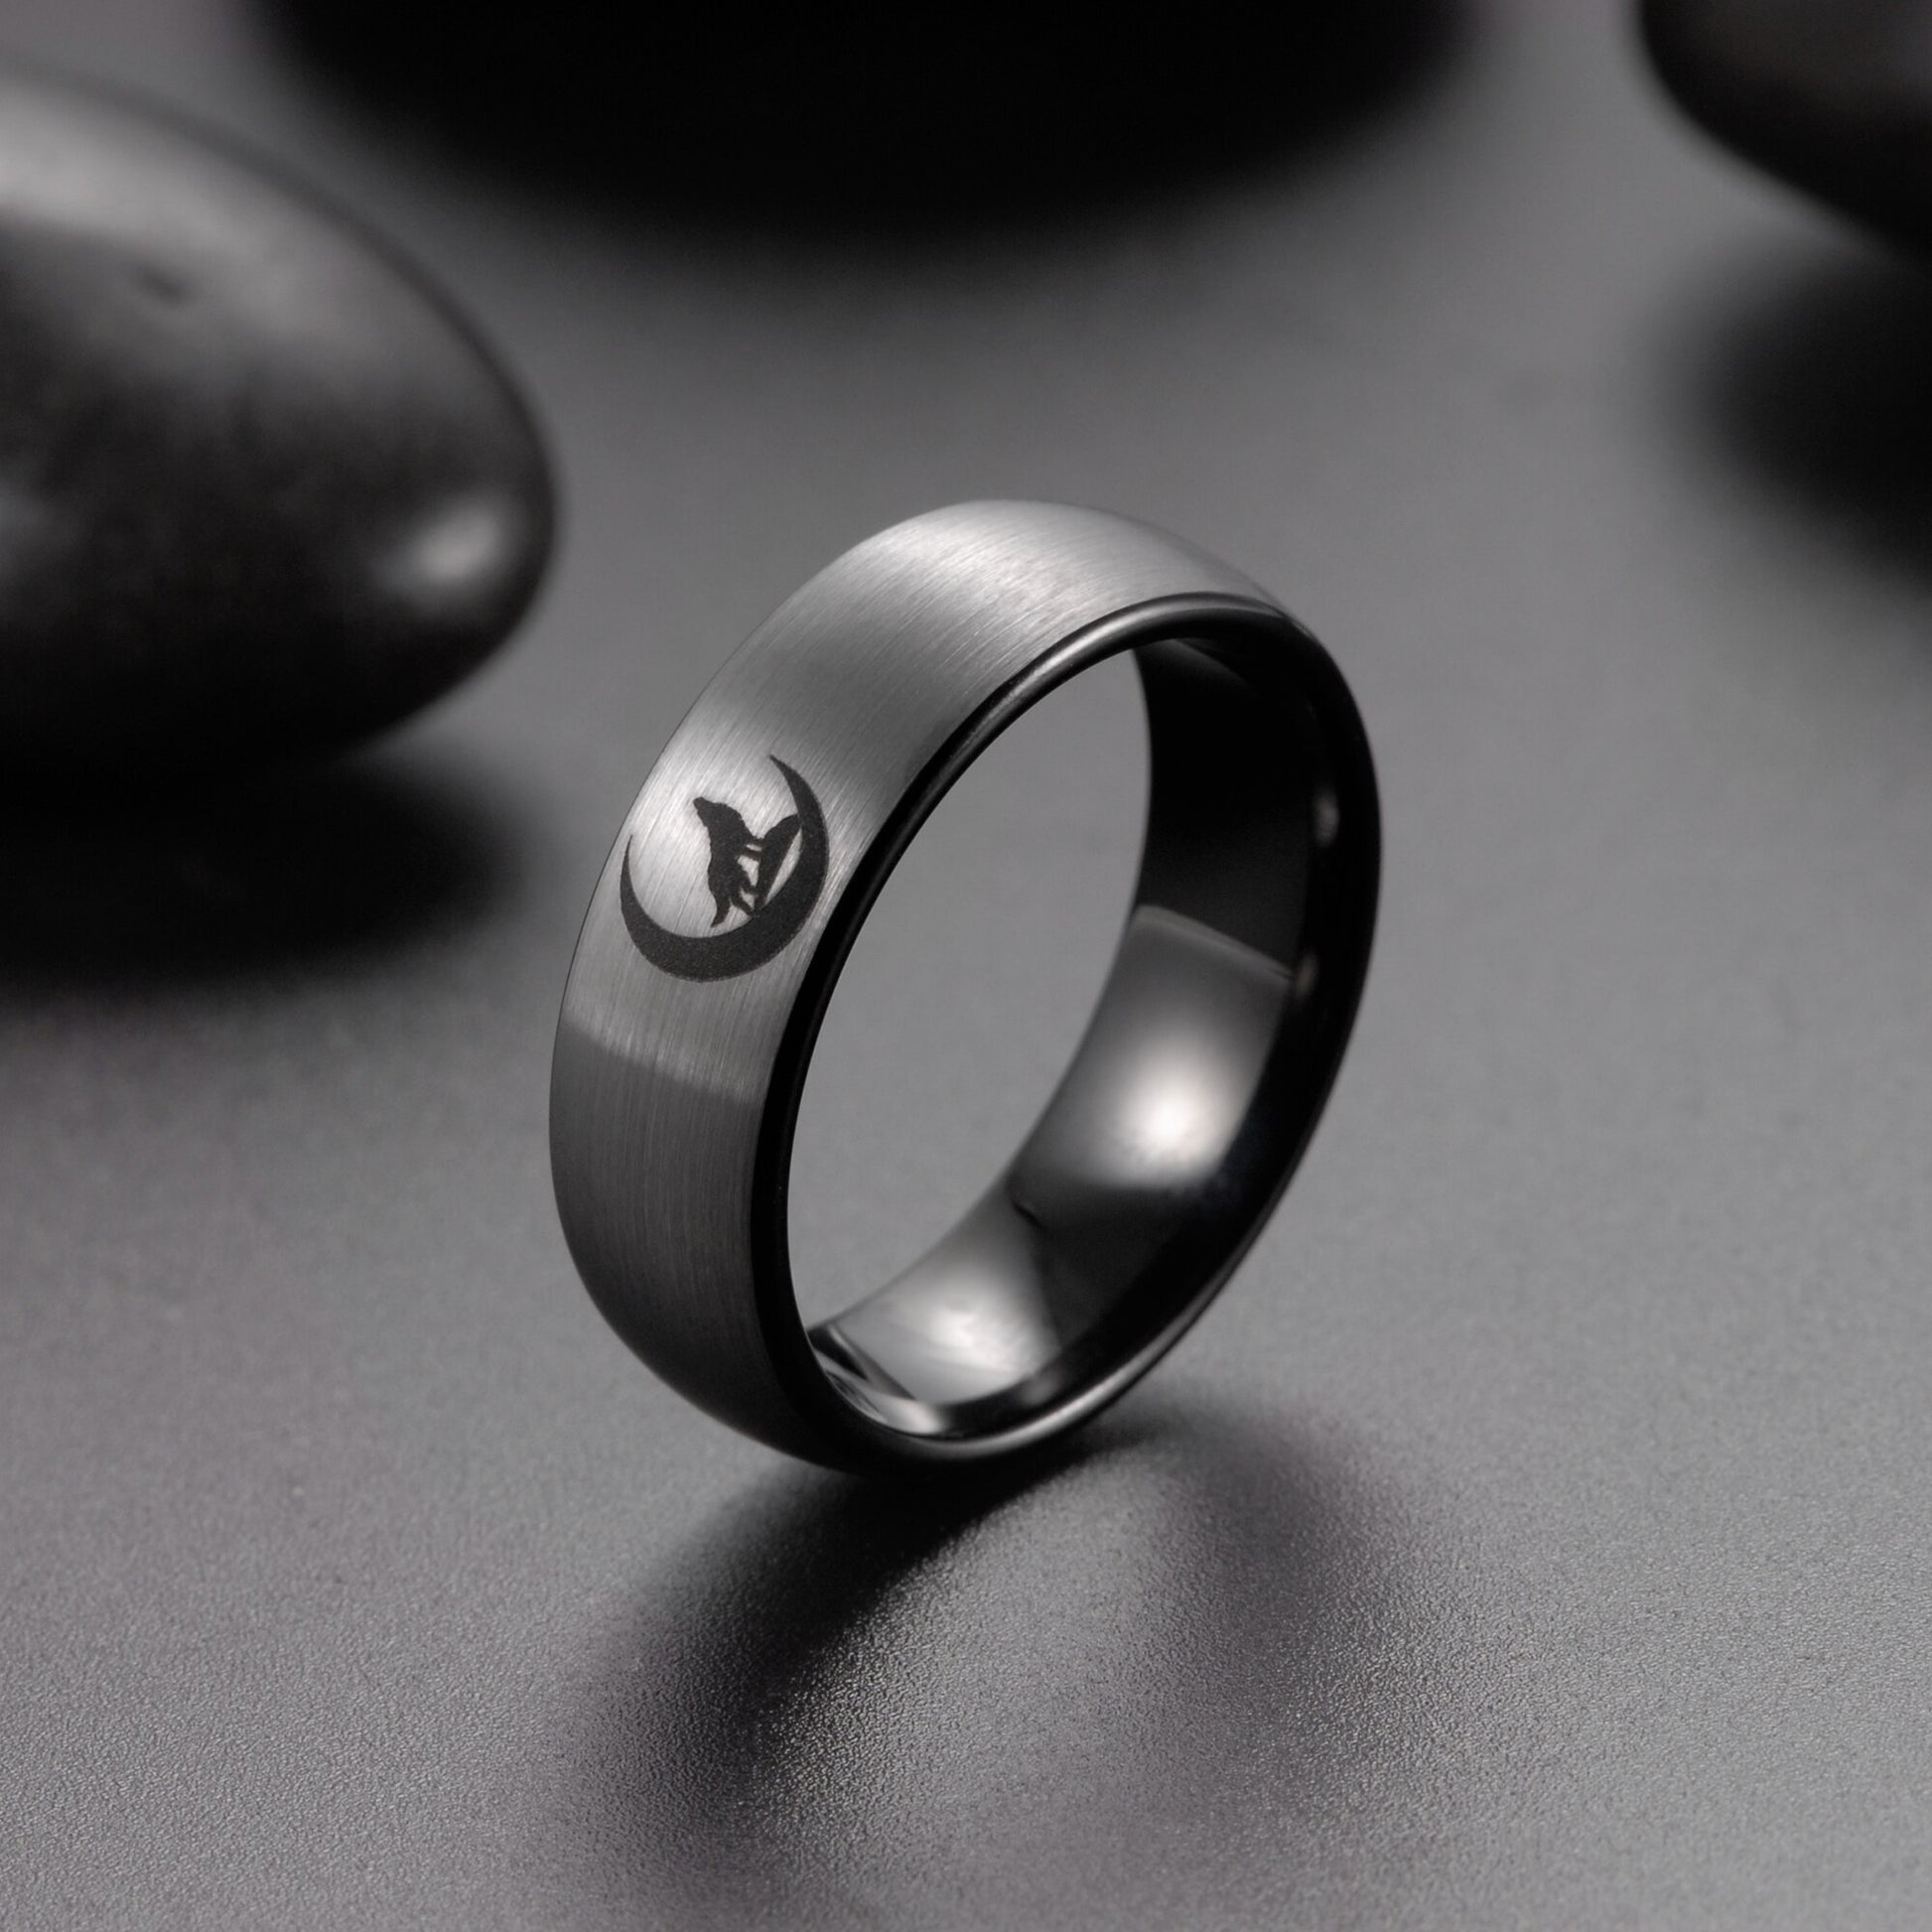 8mm Howling Wolf & Moon Outdoors Men's Ring